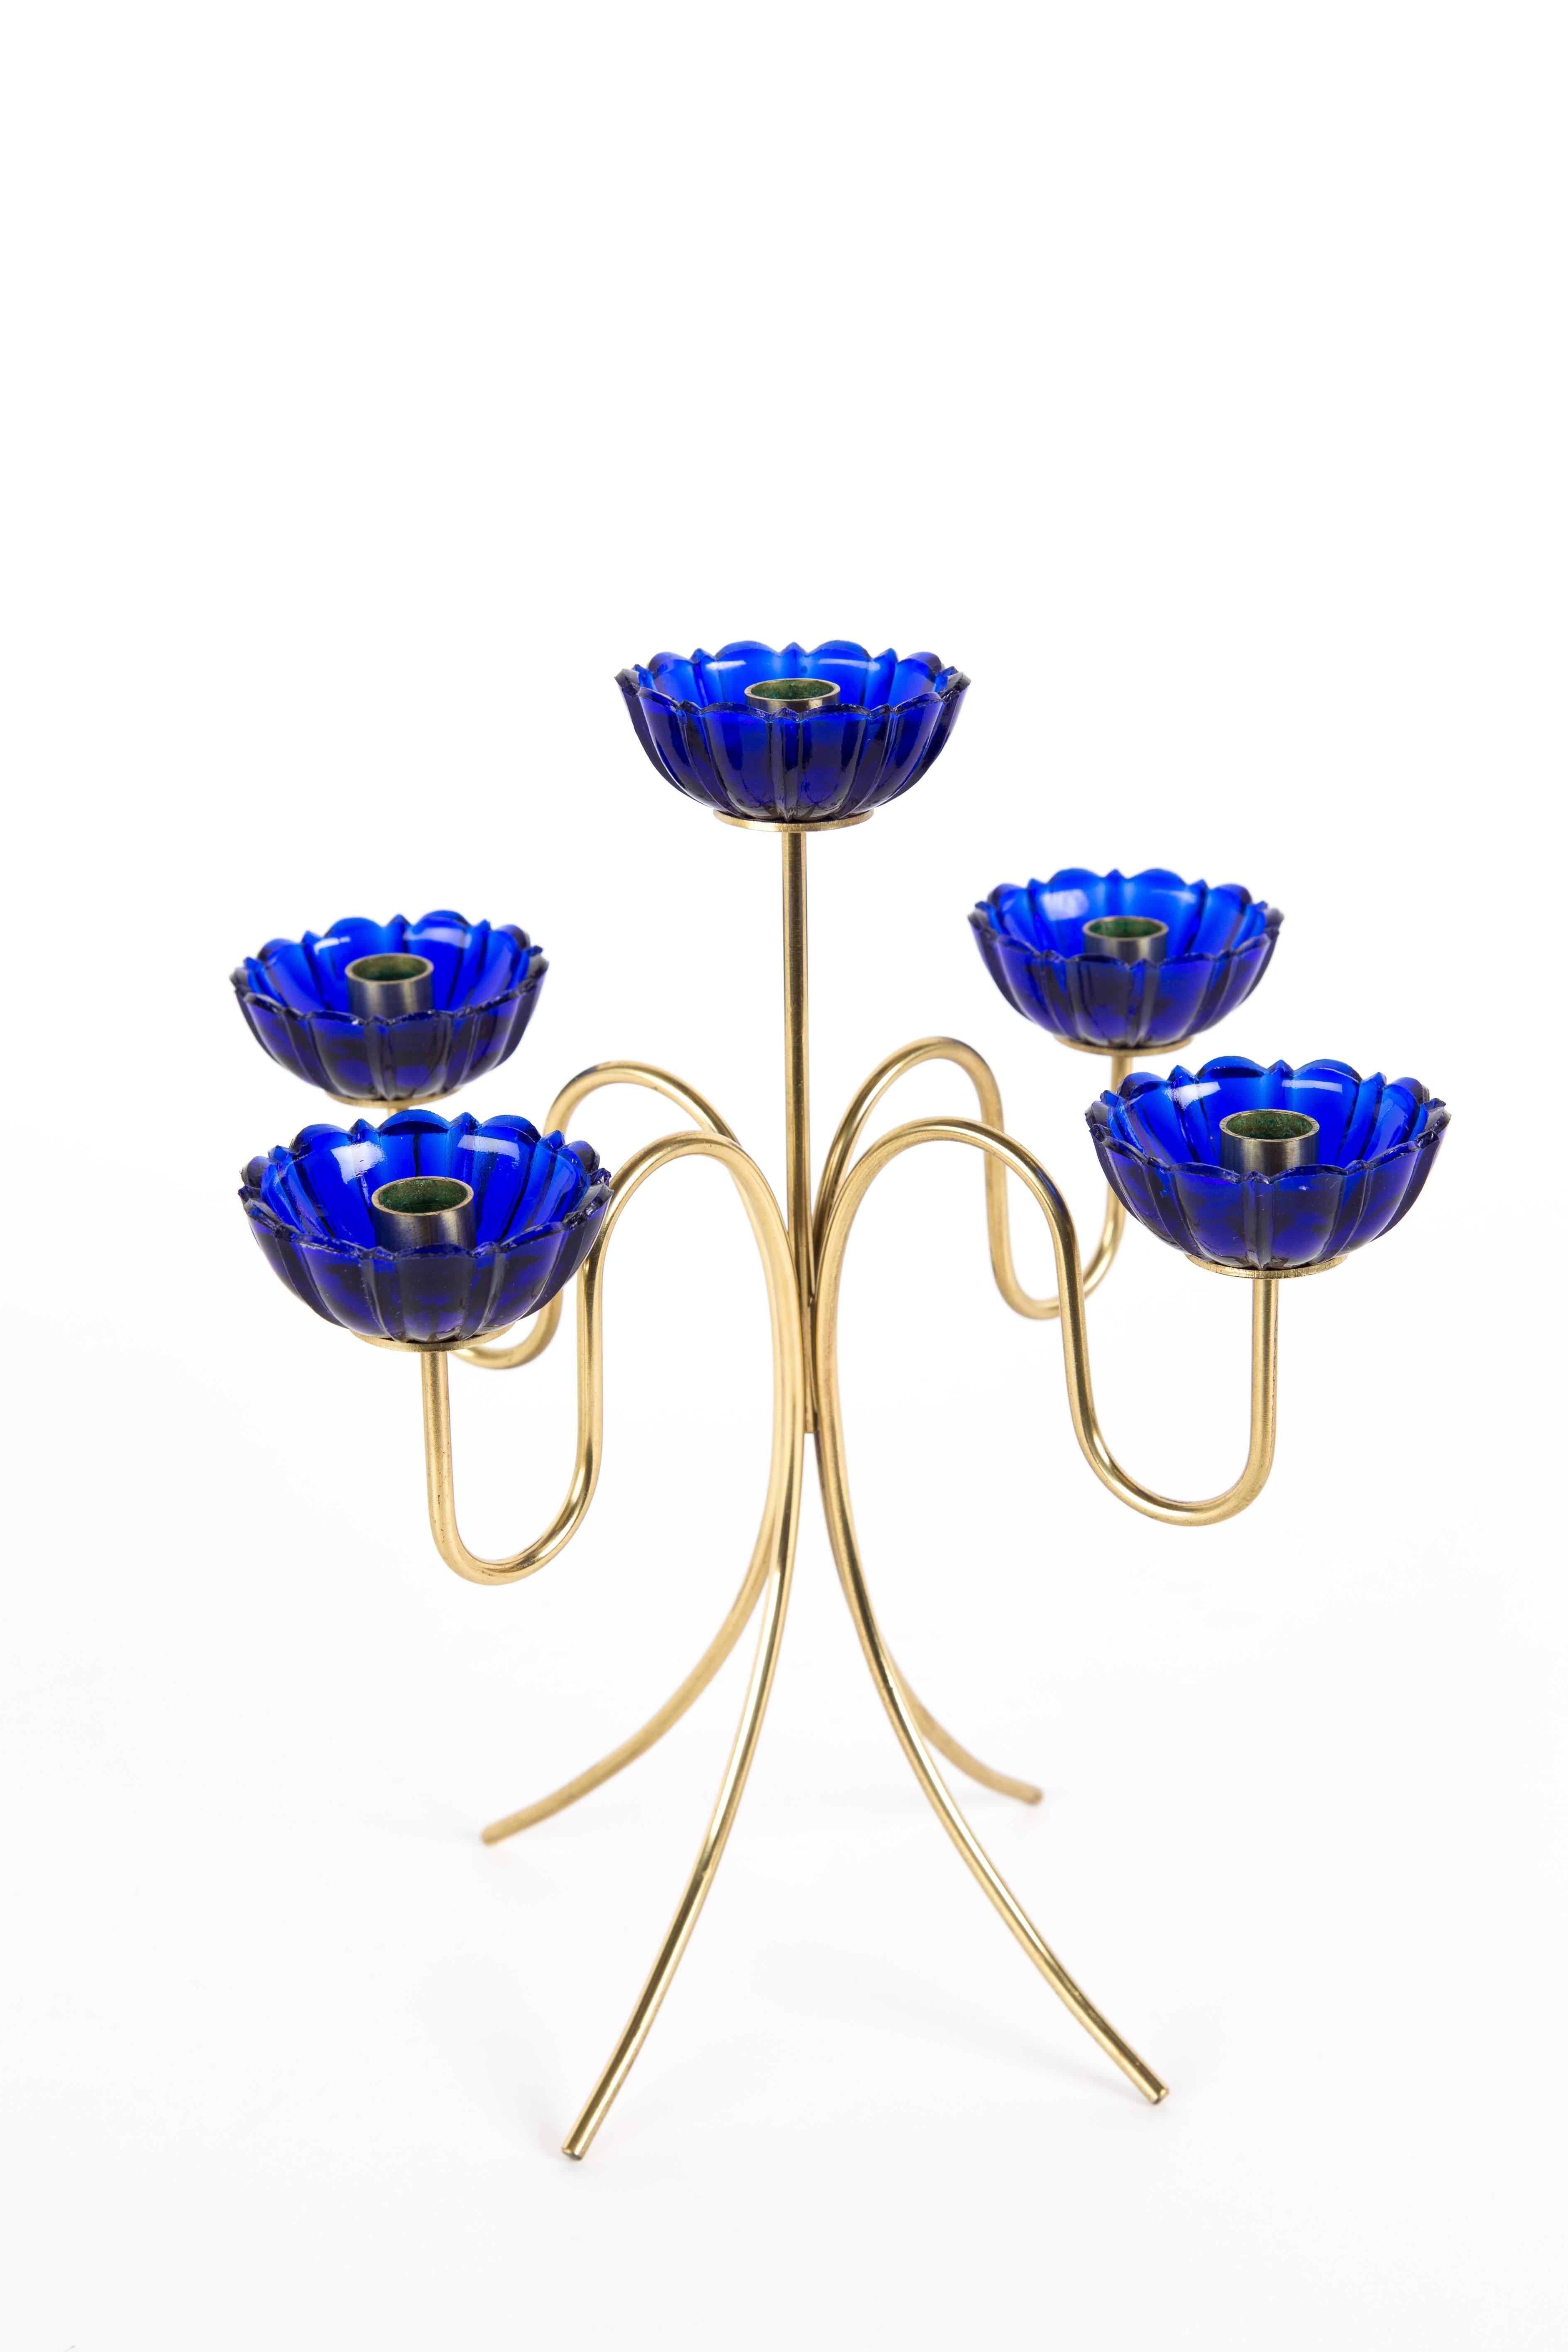 GUNNAR ANDER CANDLE HOLDER. Candle holder with four legs in brass. The blue transparent glasses are like flowers. Five glasses.
Swedish designer Gunnae Ander for Ystad Metall.